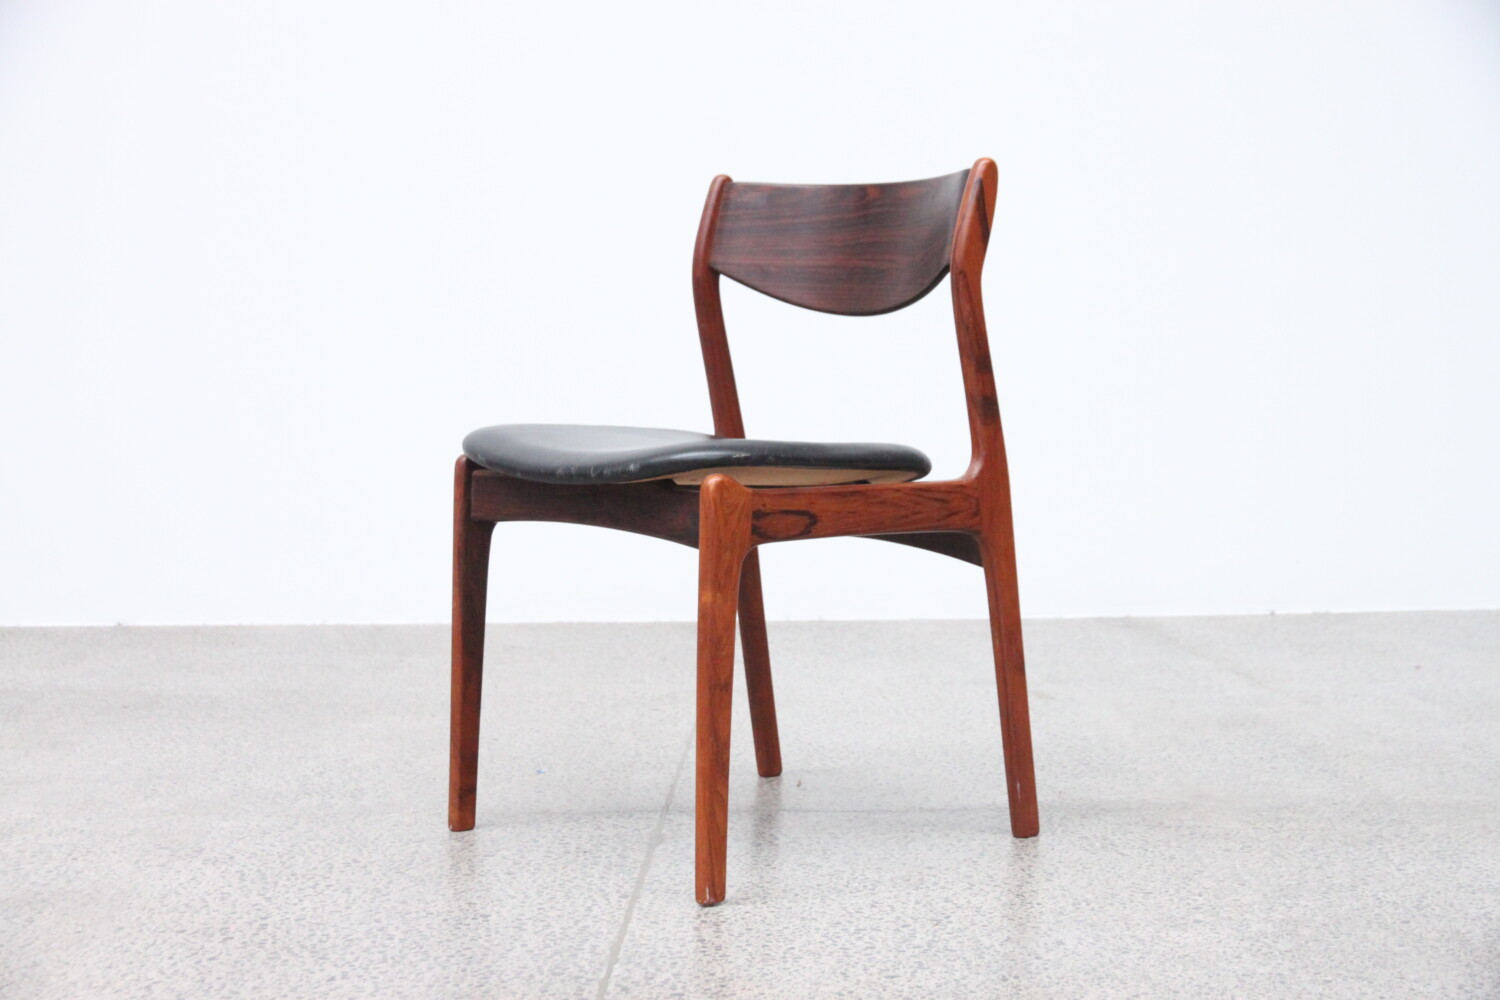 Rosewood Dining Chairs x4 by P.E Jorgensen sold